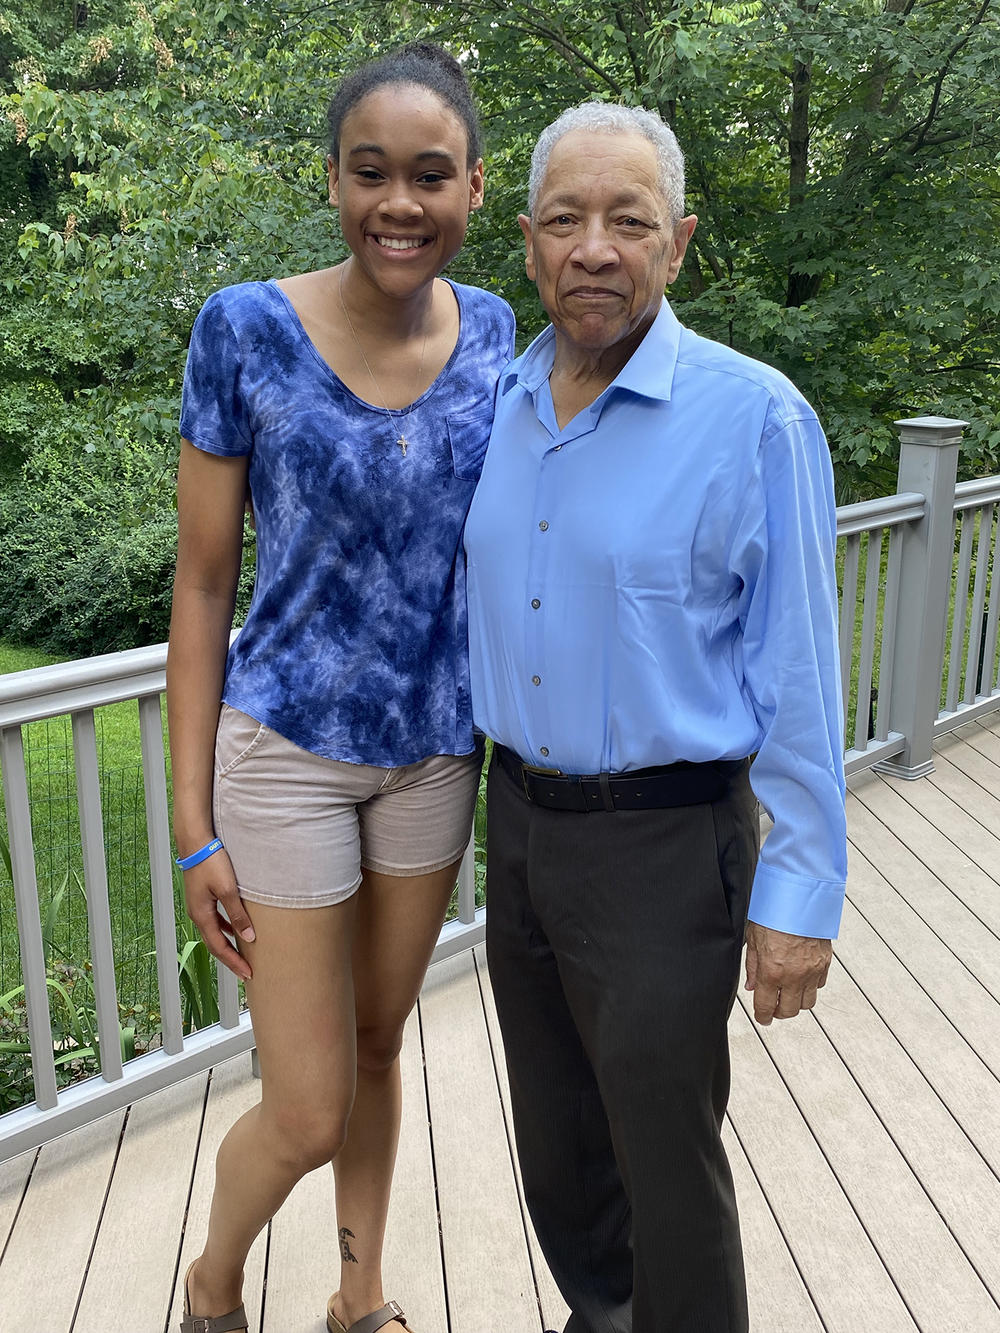 Deanna Yancey (left) and her grandfather, Ronald Yancey pose together in May 2024.